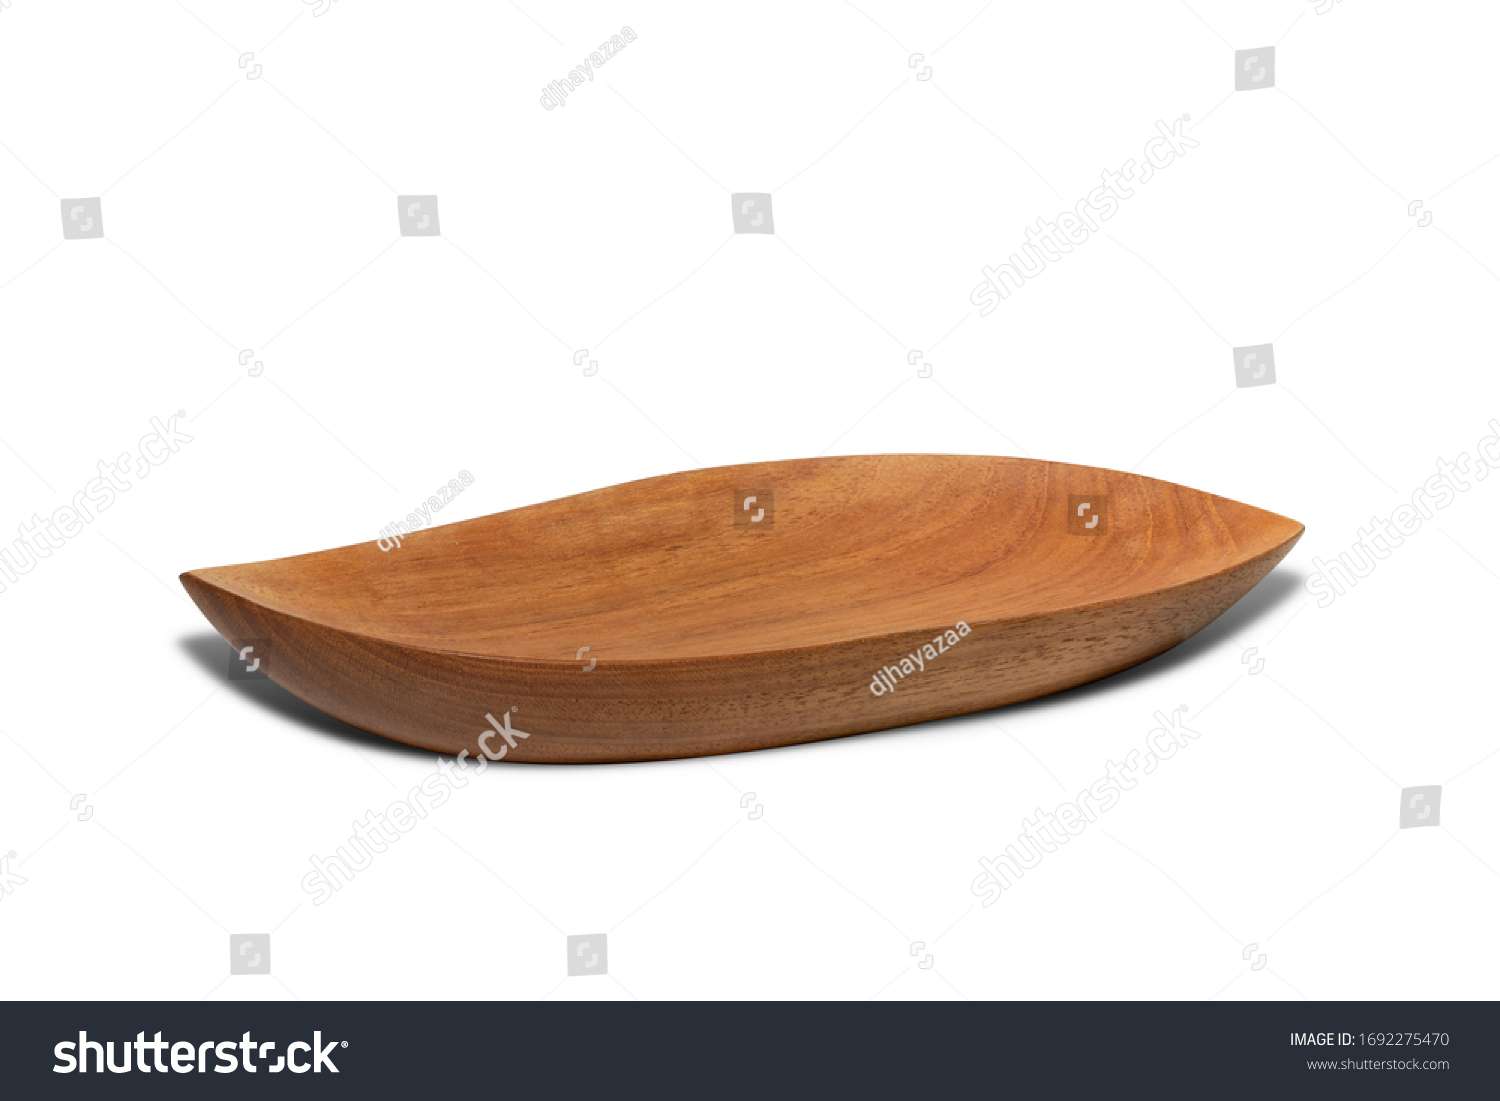 Empty Wooden plates or plates wood for food shaped like leaves with an oval shape.Serving tray isolated on white background with clipping path.
 #1692275470